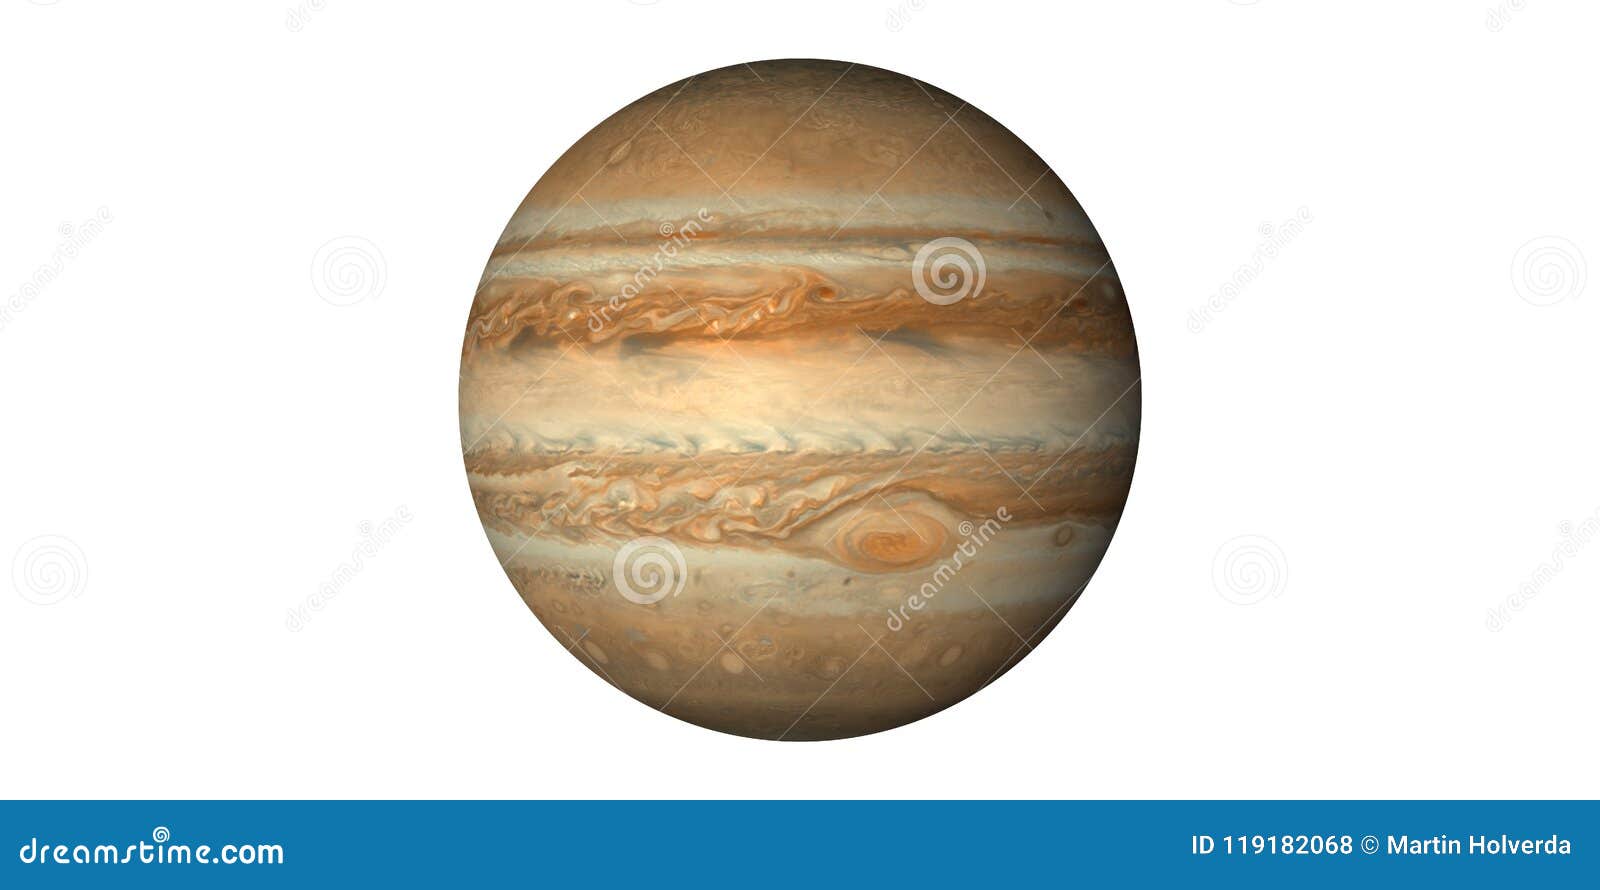 planet jupiter in solar system seen from space